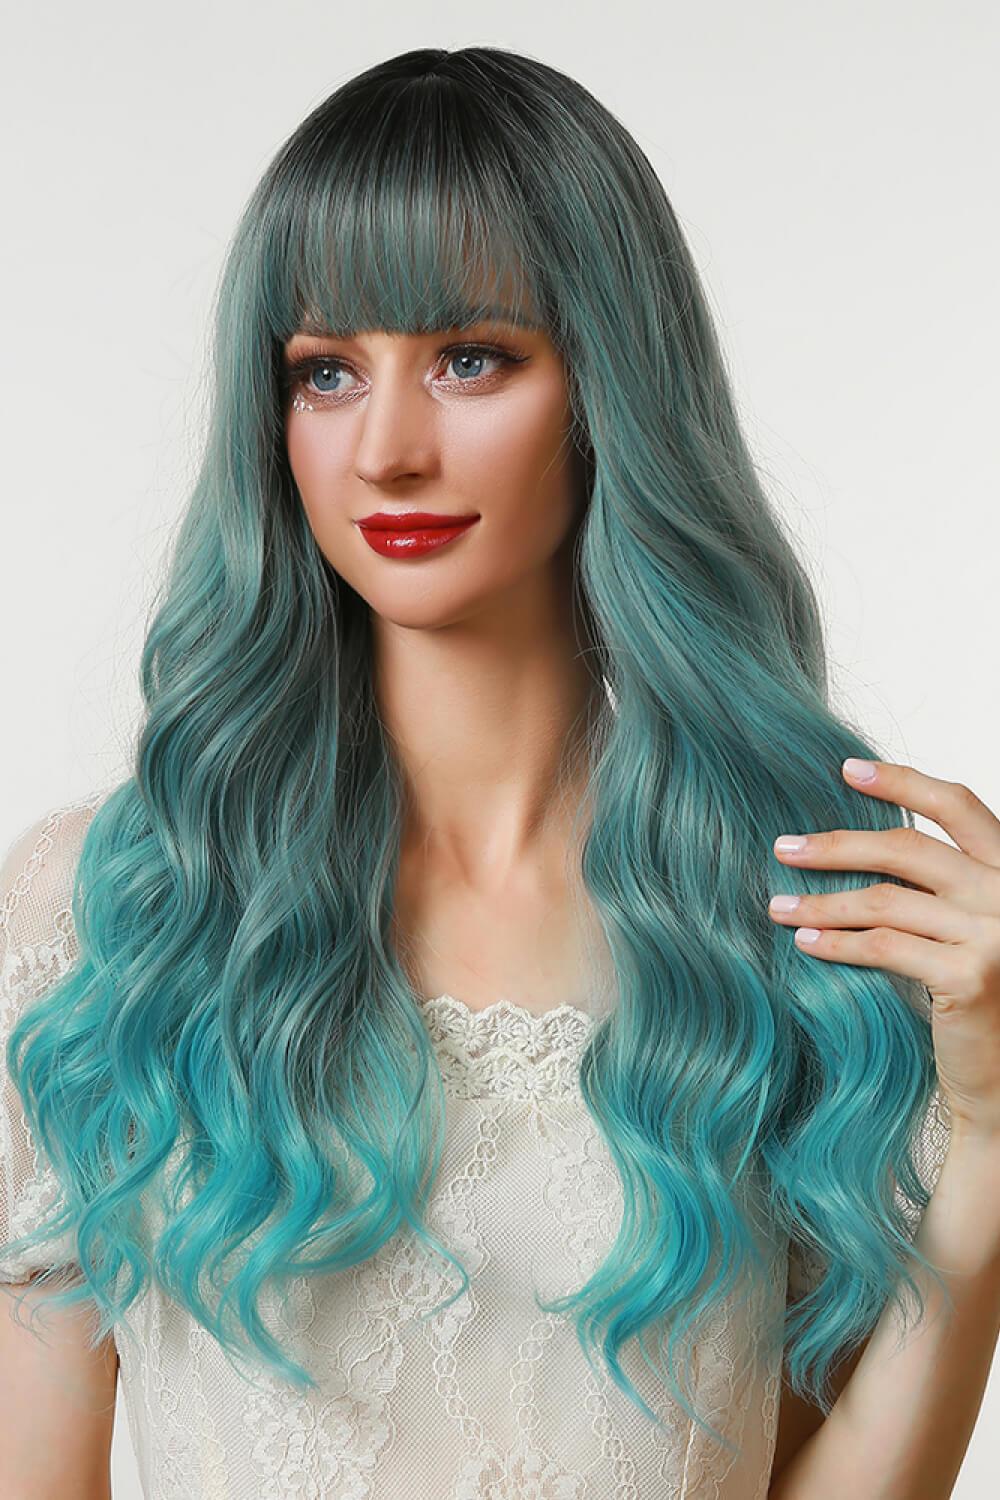 13*1" Full-Machine Wigs Synthetic Long Wave 26"